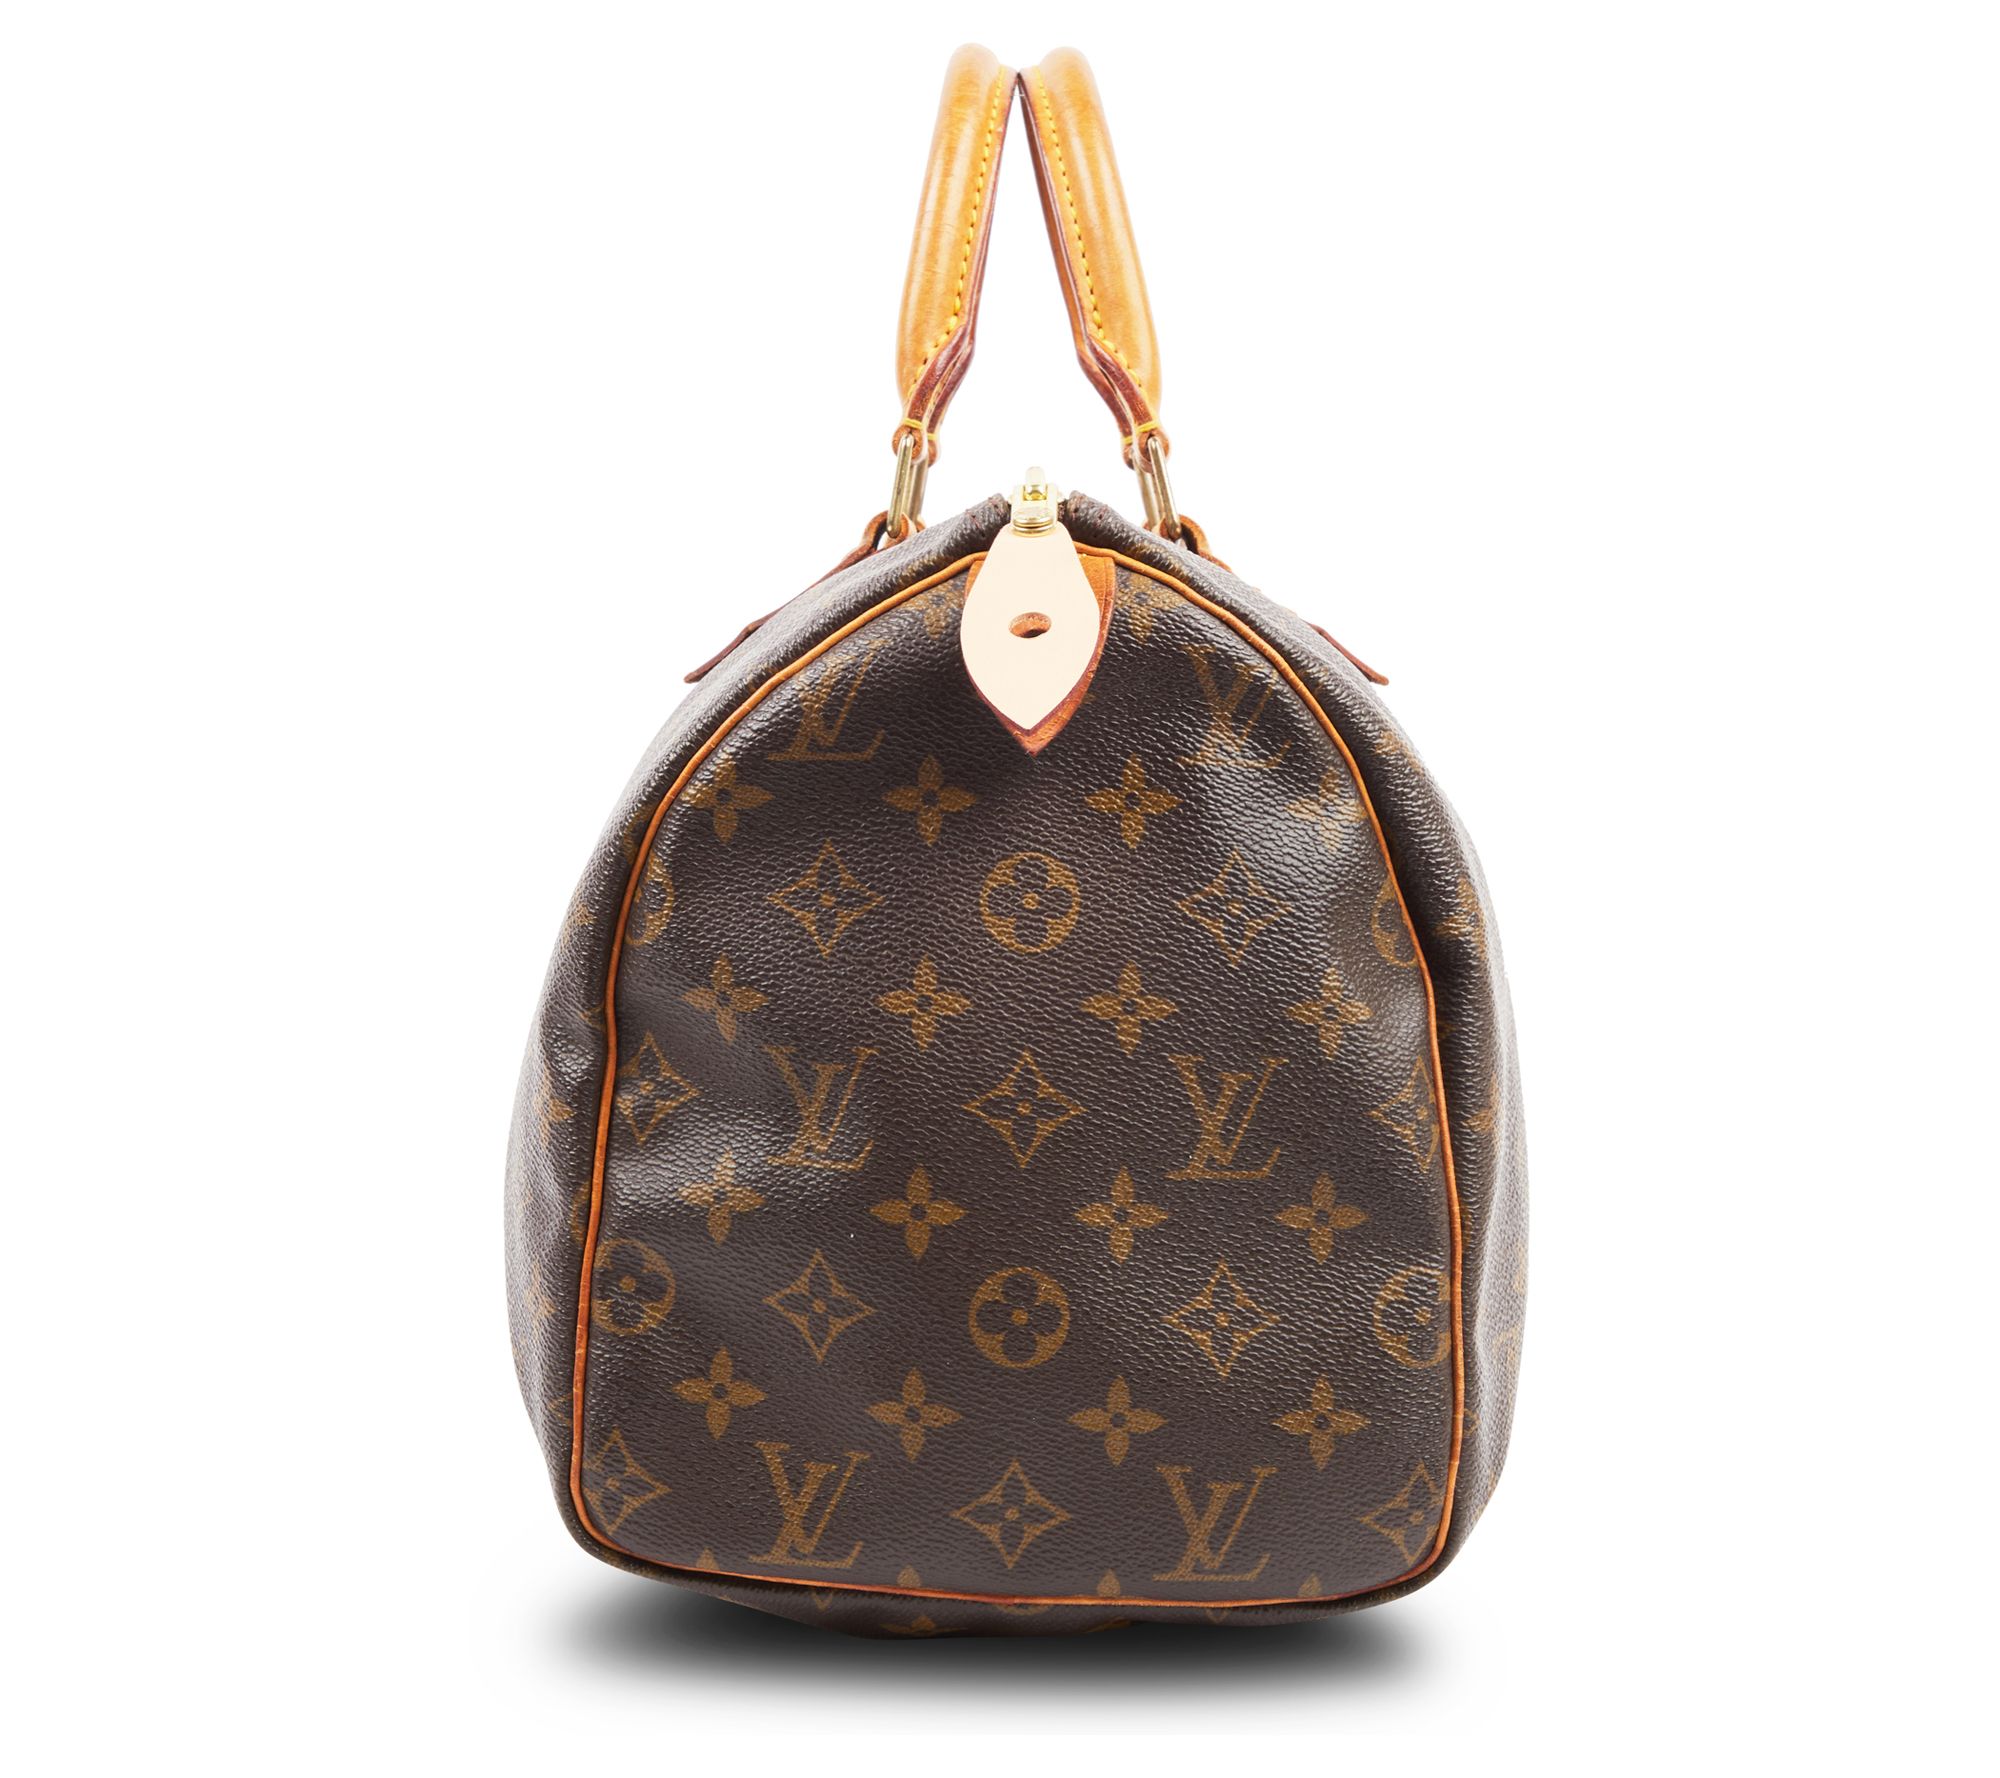 Basic handle cover (protector) for LV Speedy bag